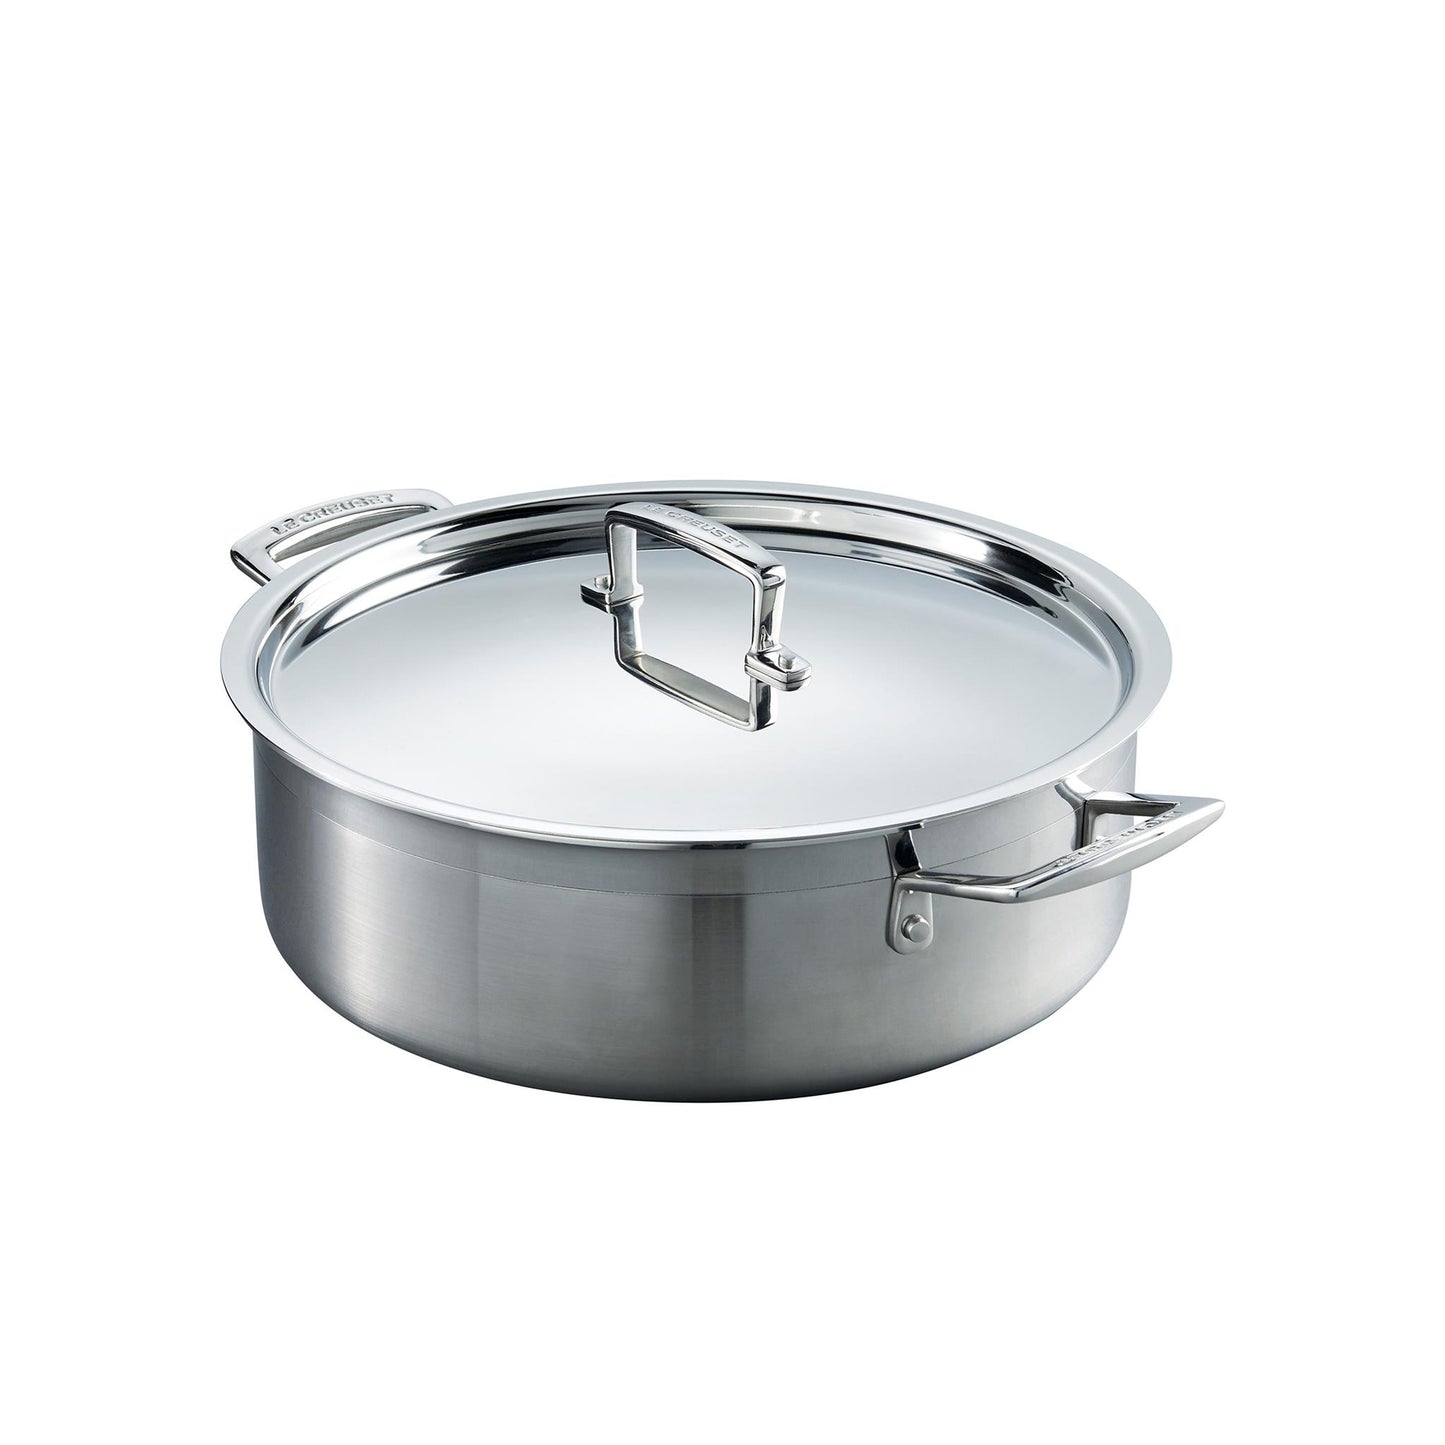 The stainless steel sauteause pan with a handled lid and two handles on the side